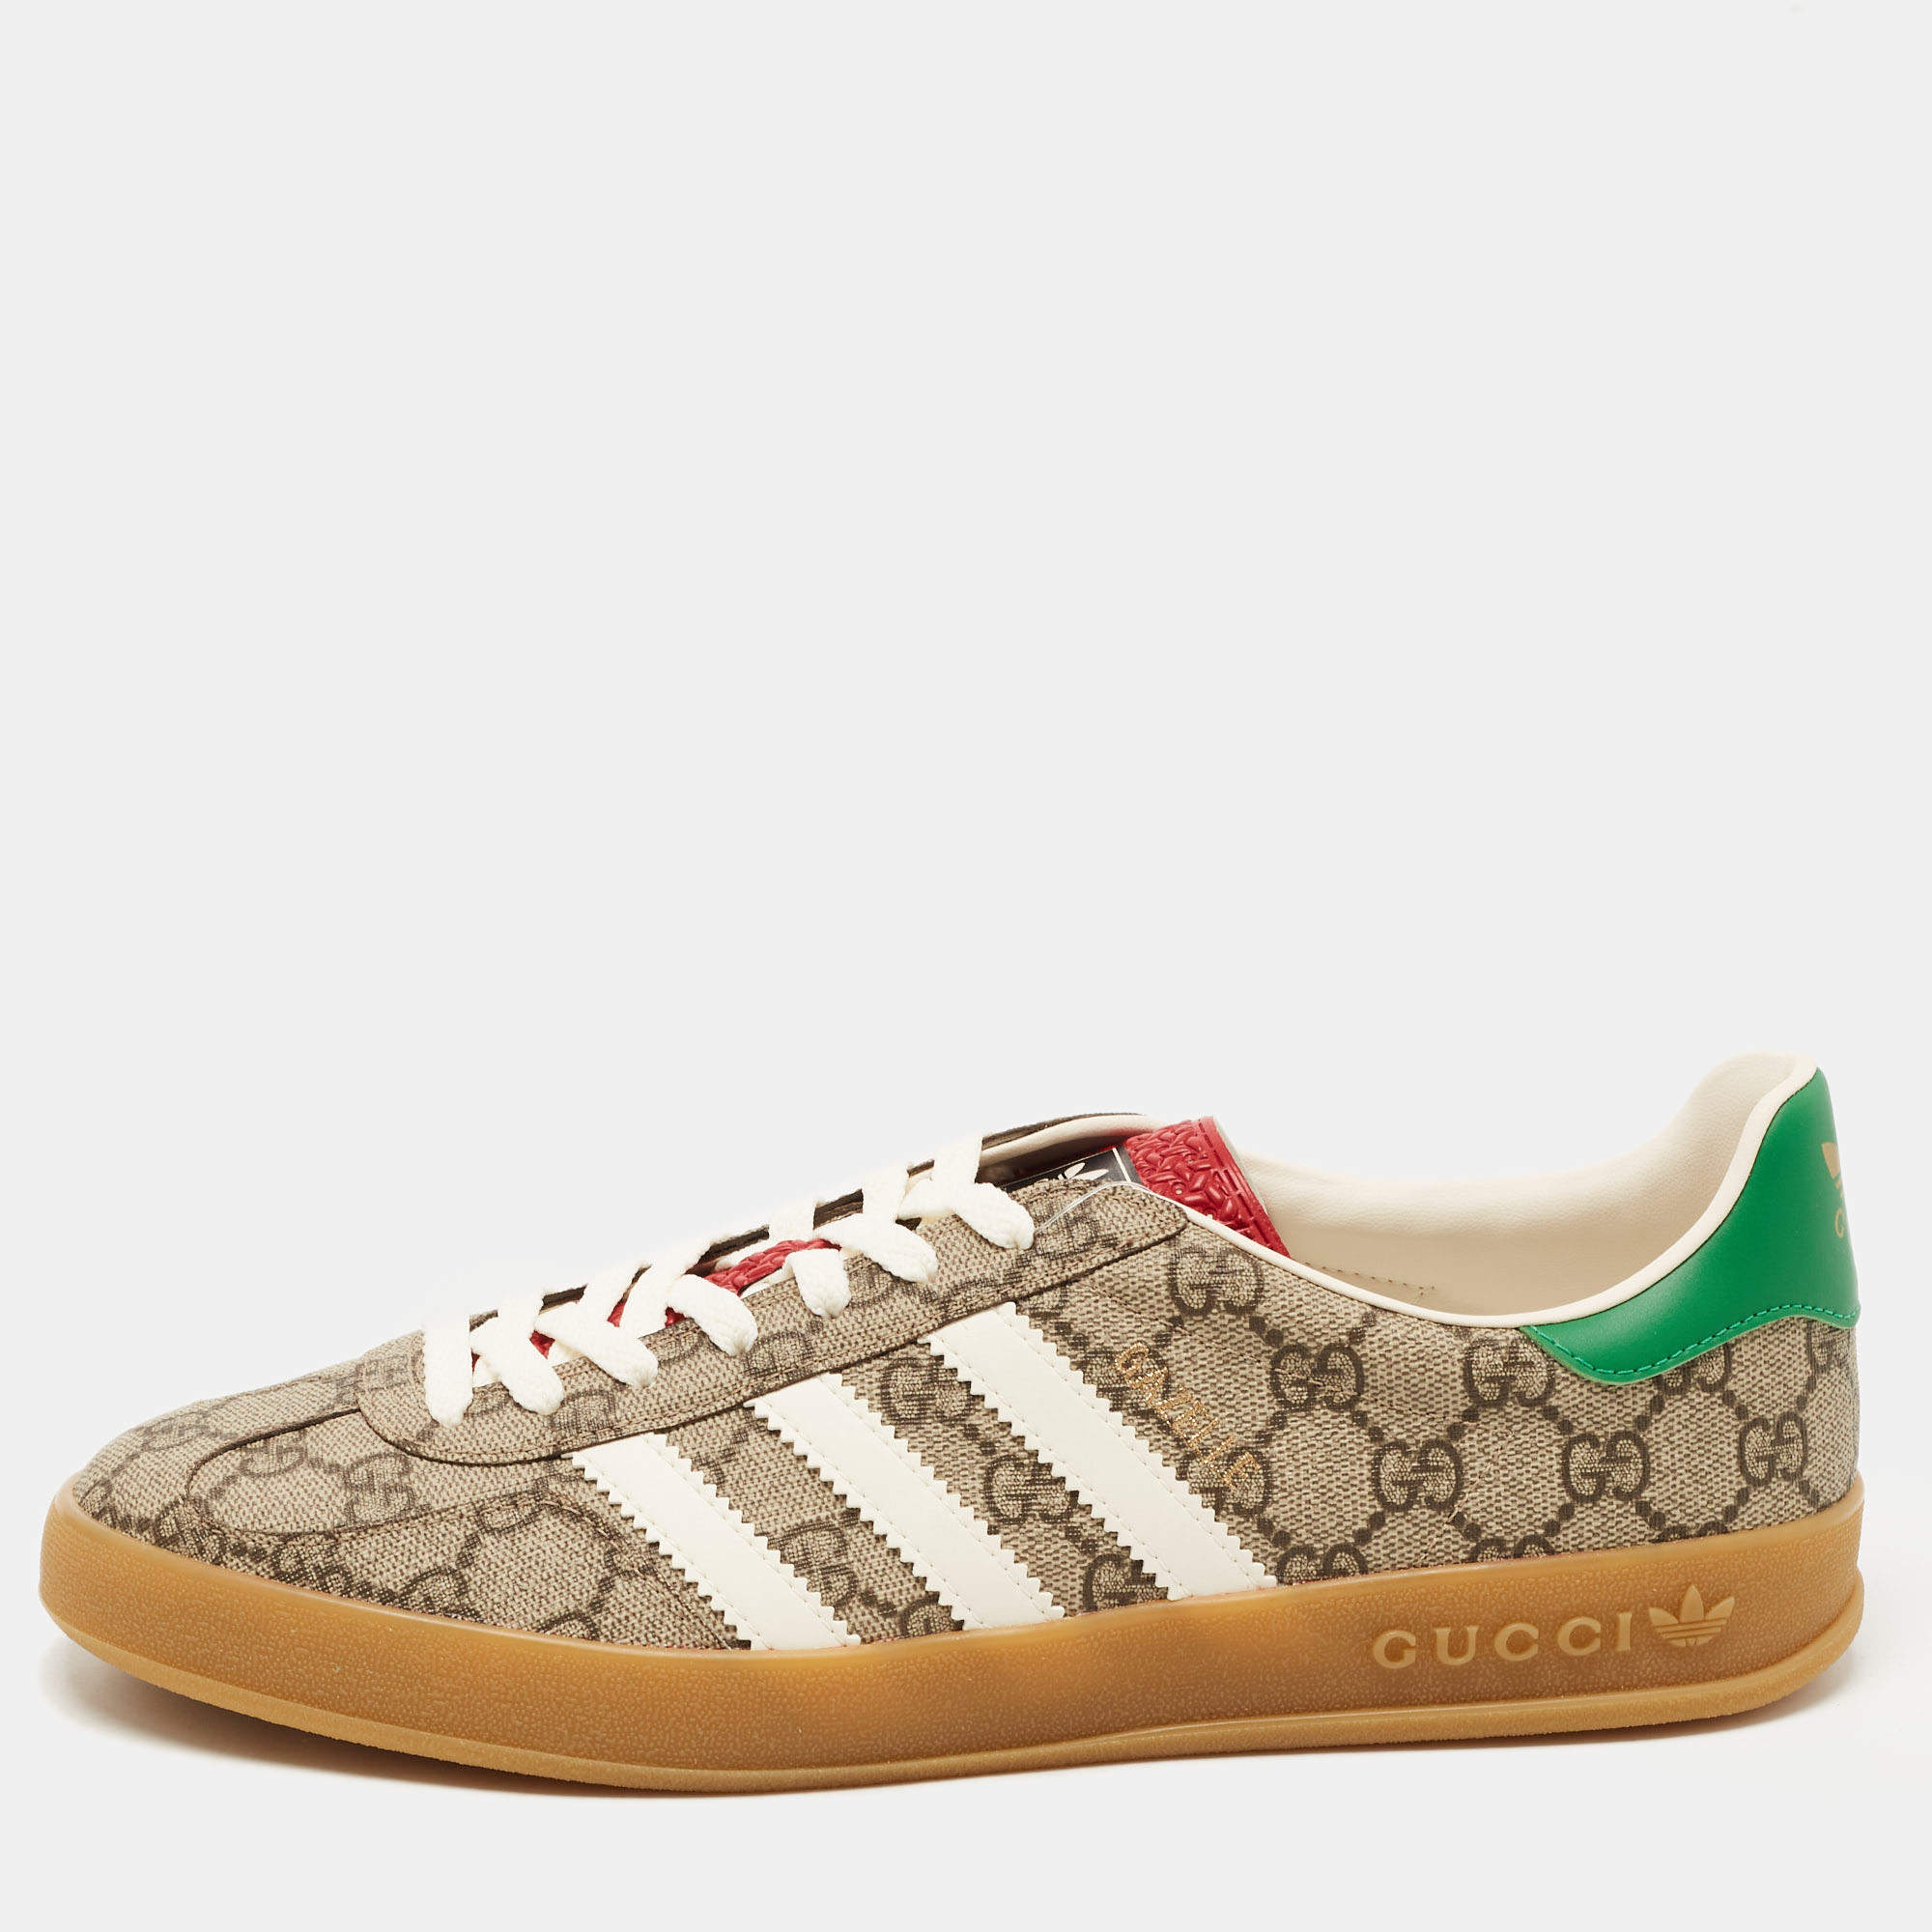 Adidas x Gucci Beige/Brown GG Canvas Gazelle Low Top Sneakers Size 44 Gucci